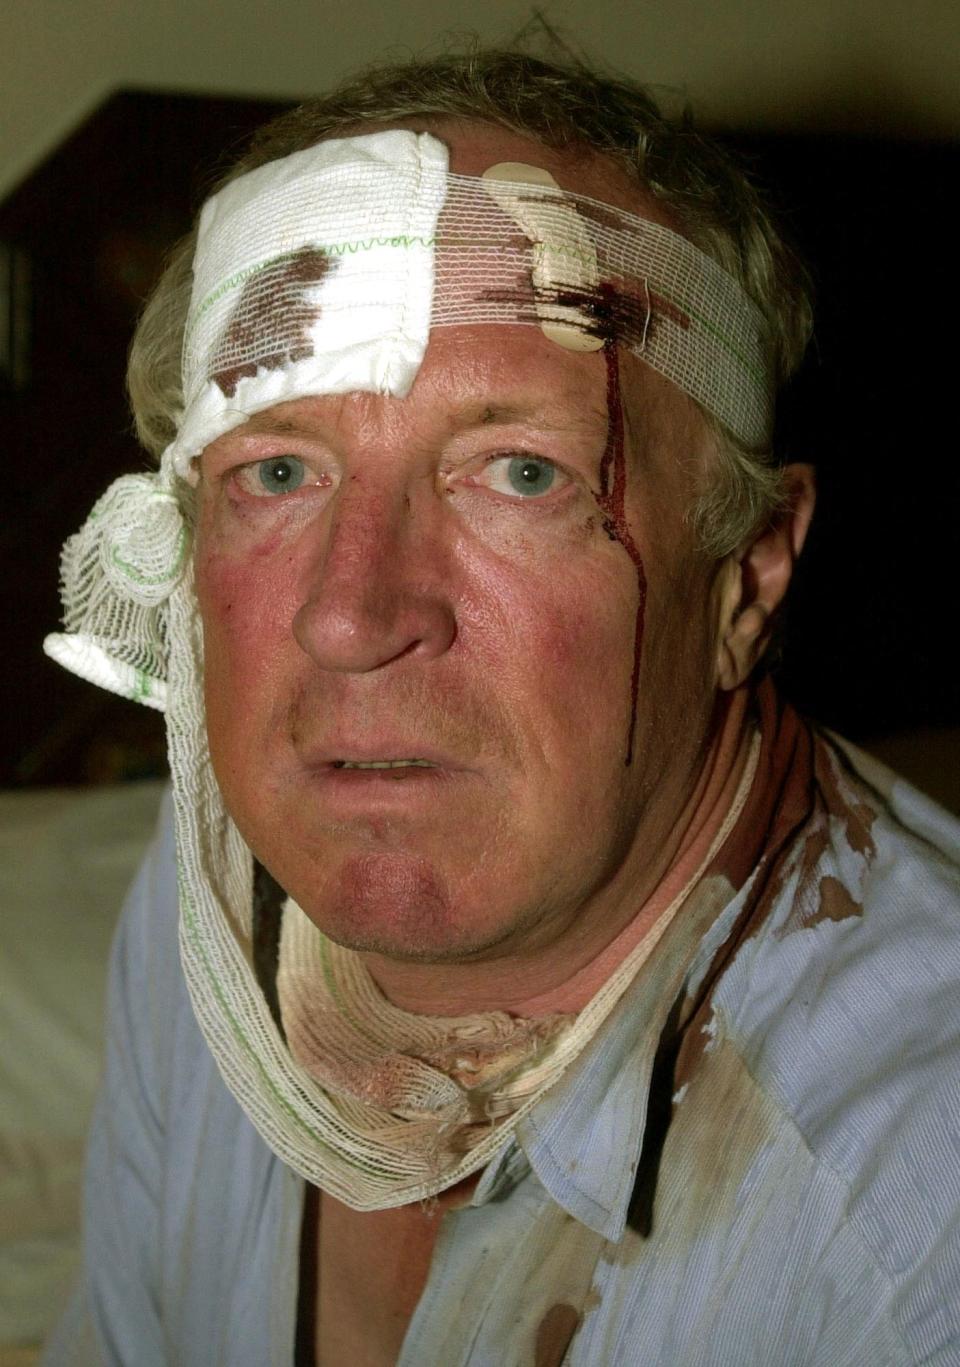 FILE - In this Dec. 8, 2001 file photo, veteran Robert Fisk, a British journalist working for the London daily, The Independent, is pictured in his hotel room in Quetta, Pakistan, after being beaten by a mob on the road linking the border town of Chaman to Quetta. Fisk, one of the best-known Middle East correspondents who spent his entire career reporting from the troubled region and won accolades for challenging mainstream narratives died Sunday at a hospital in Dublin after a short illness. He was 74. (AP Photo/Hussein Malla, File)